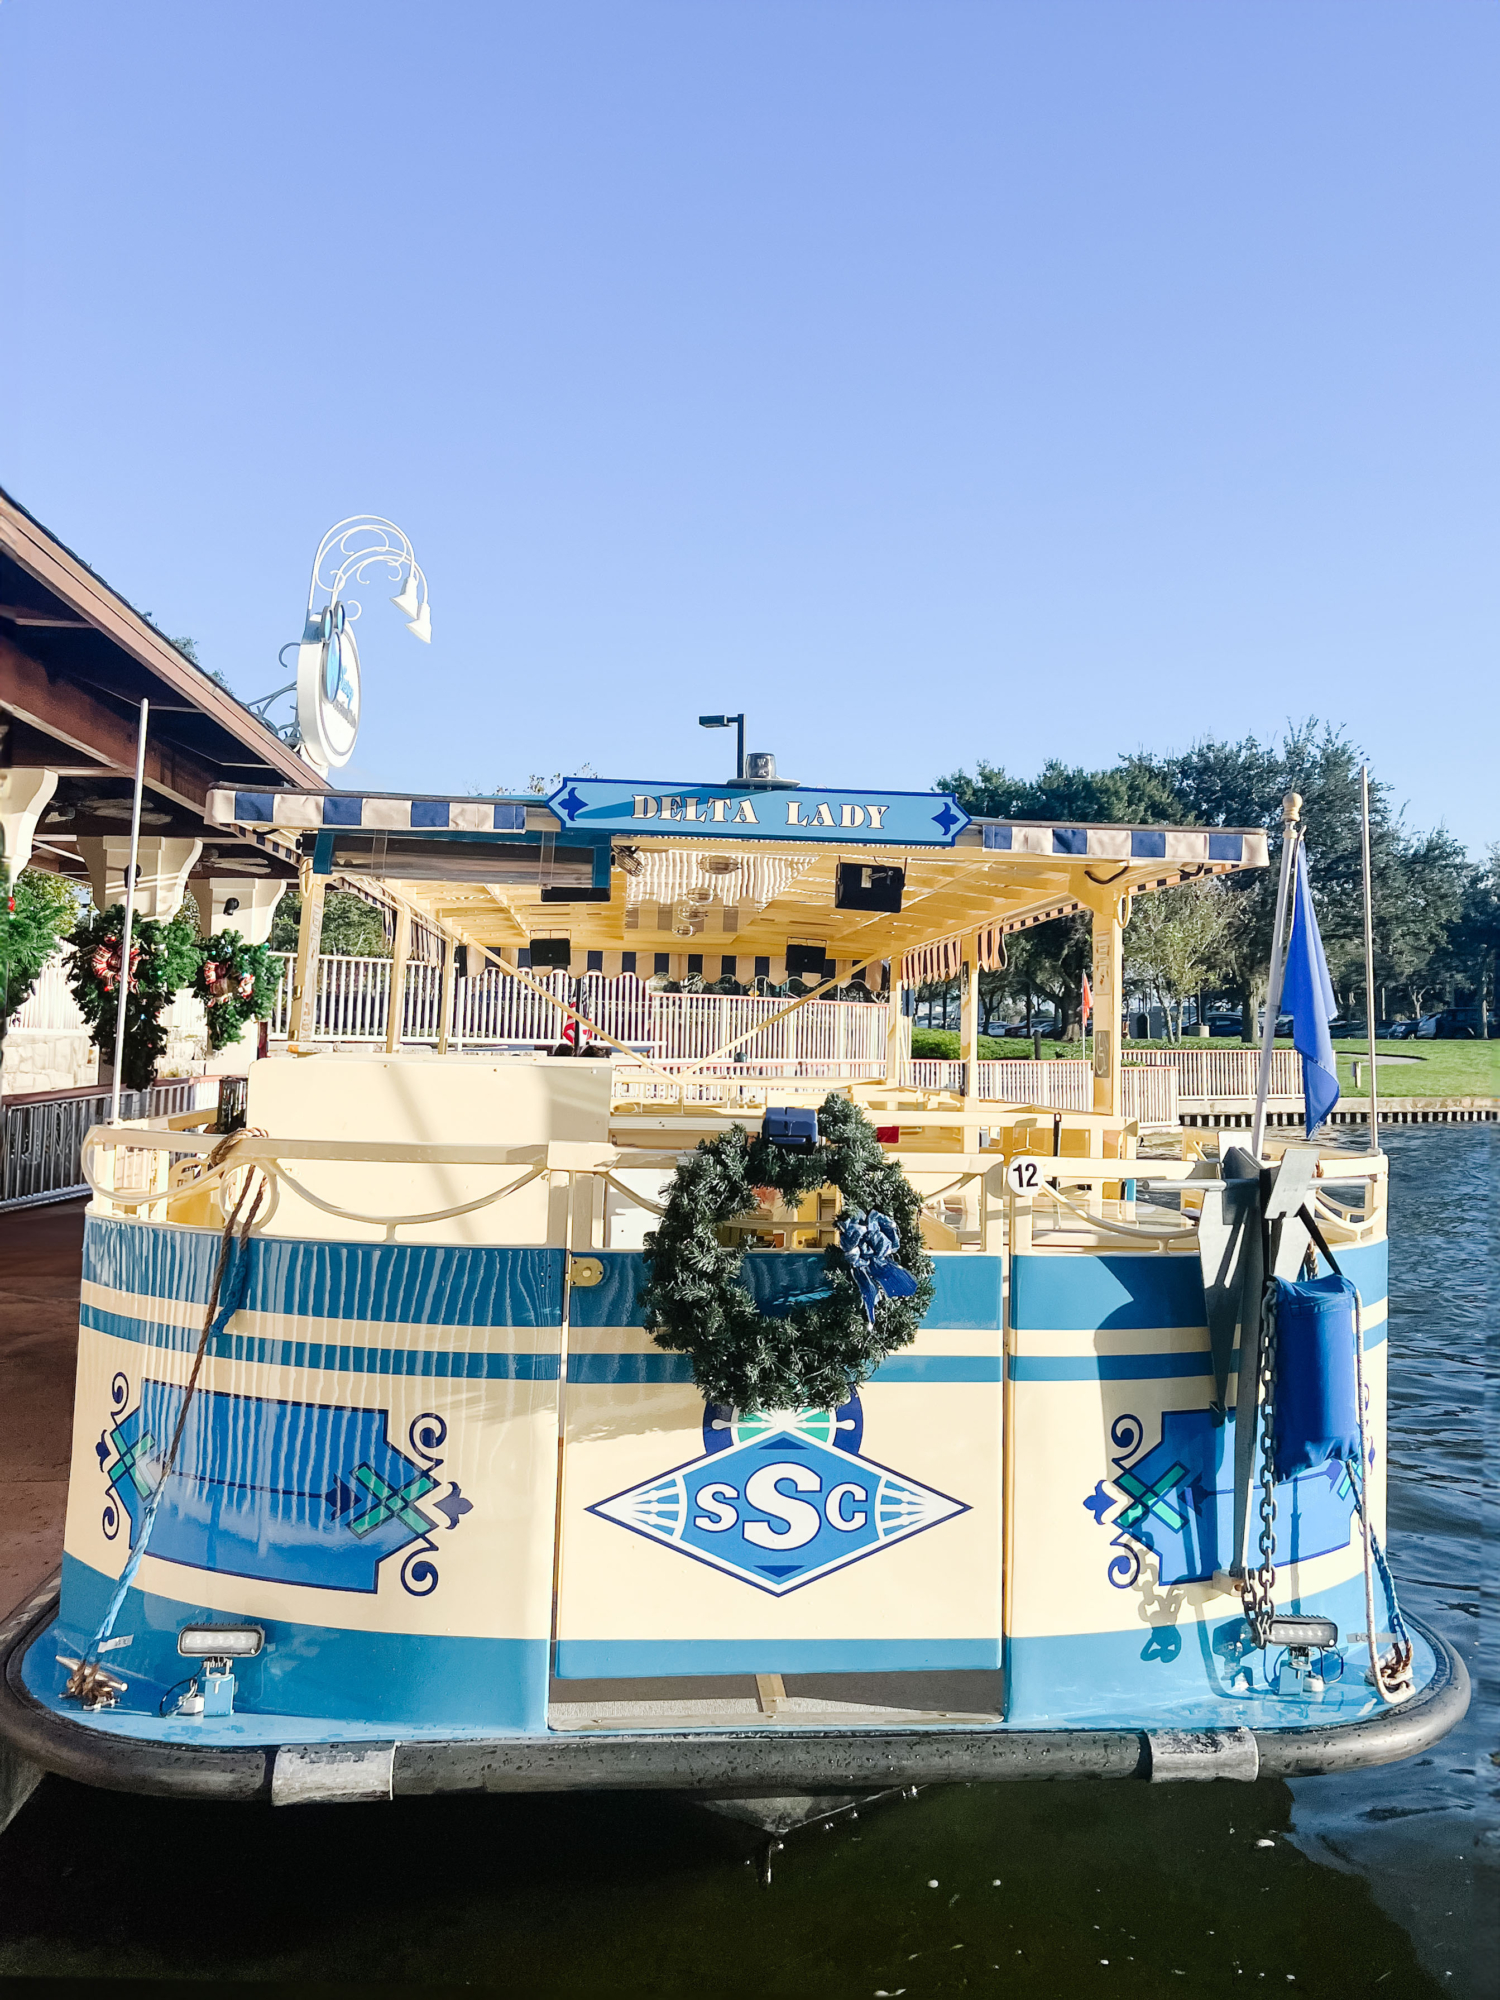 Boat Taxi at Saratoga Springs to go to Disney Springs